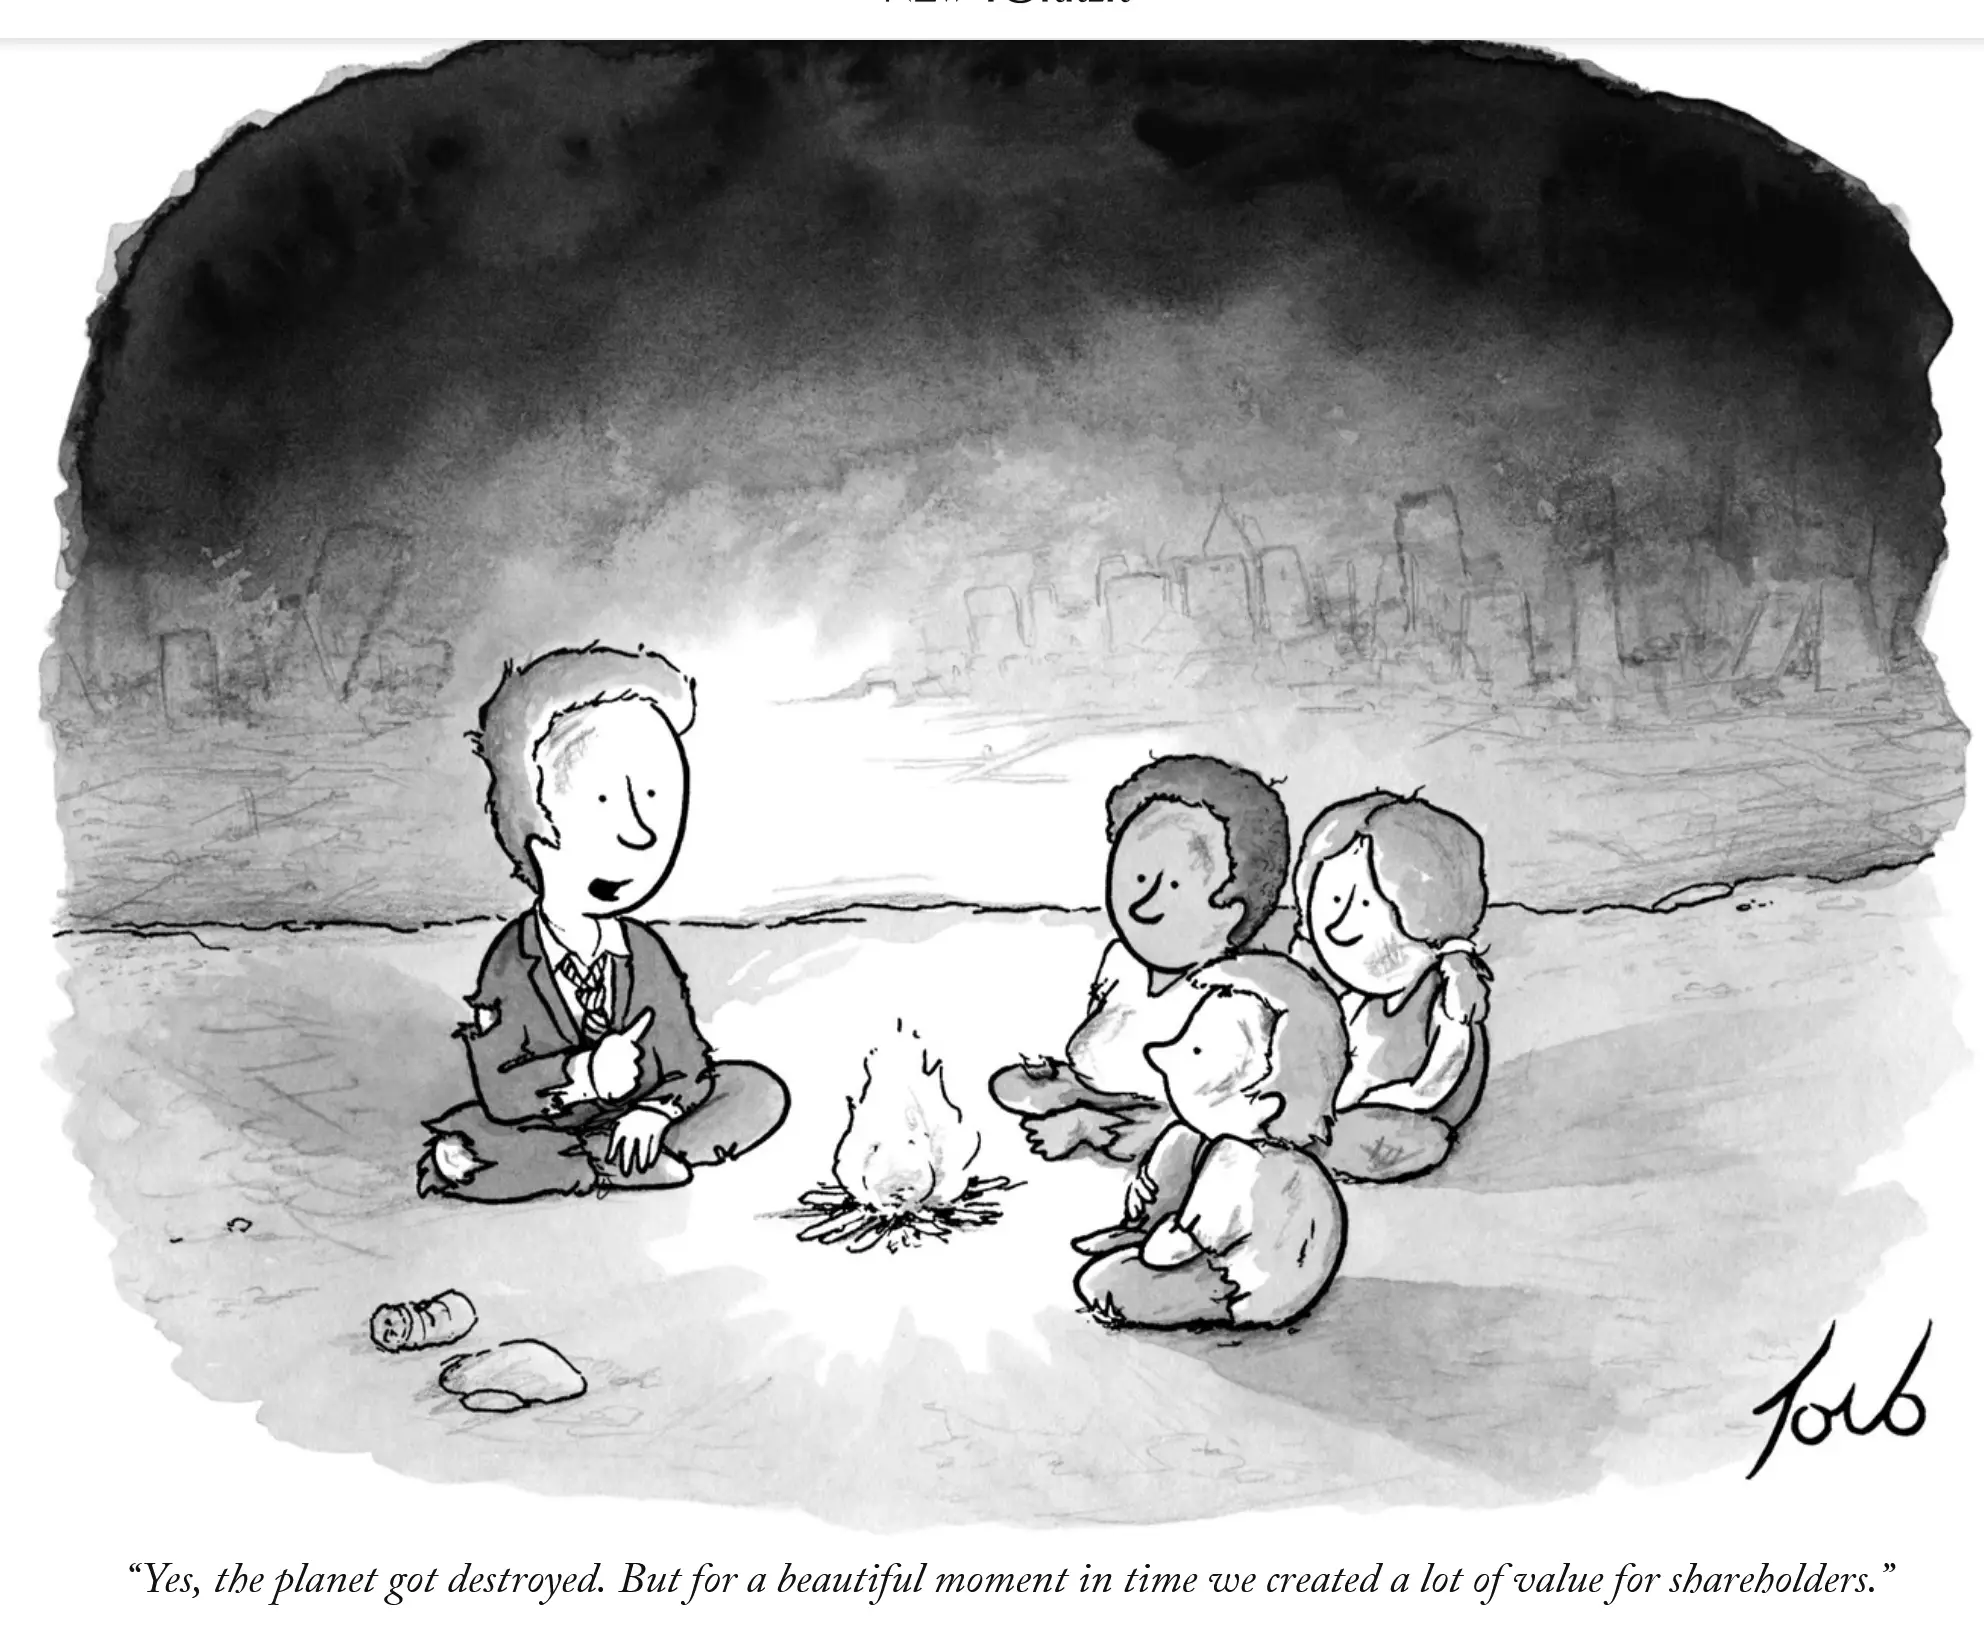 Cartoon.  Man in tattered suit talking to children across a fire.  Vague ruined city behind him.  Caption: “Yes, the planet got destroyed. But for a beautiful moment in time we created a lot of value for shareholders.”